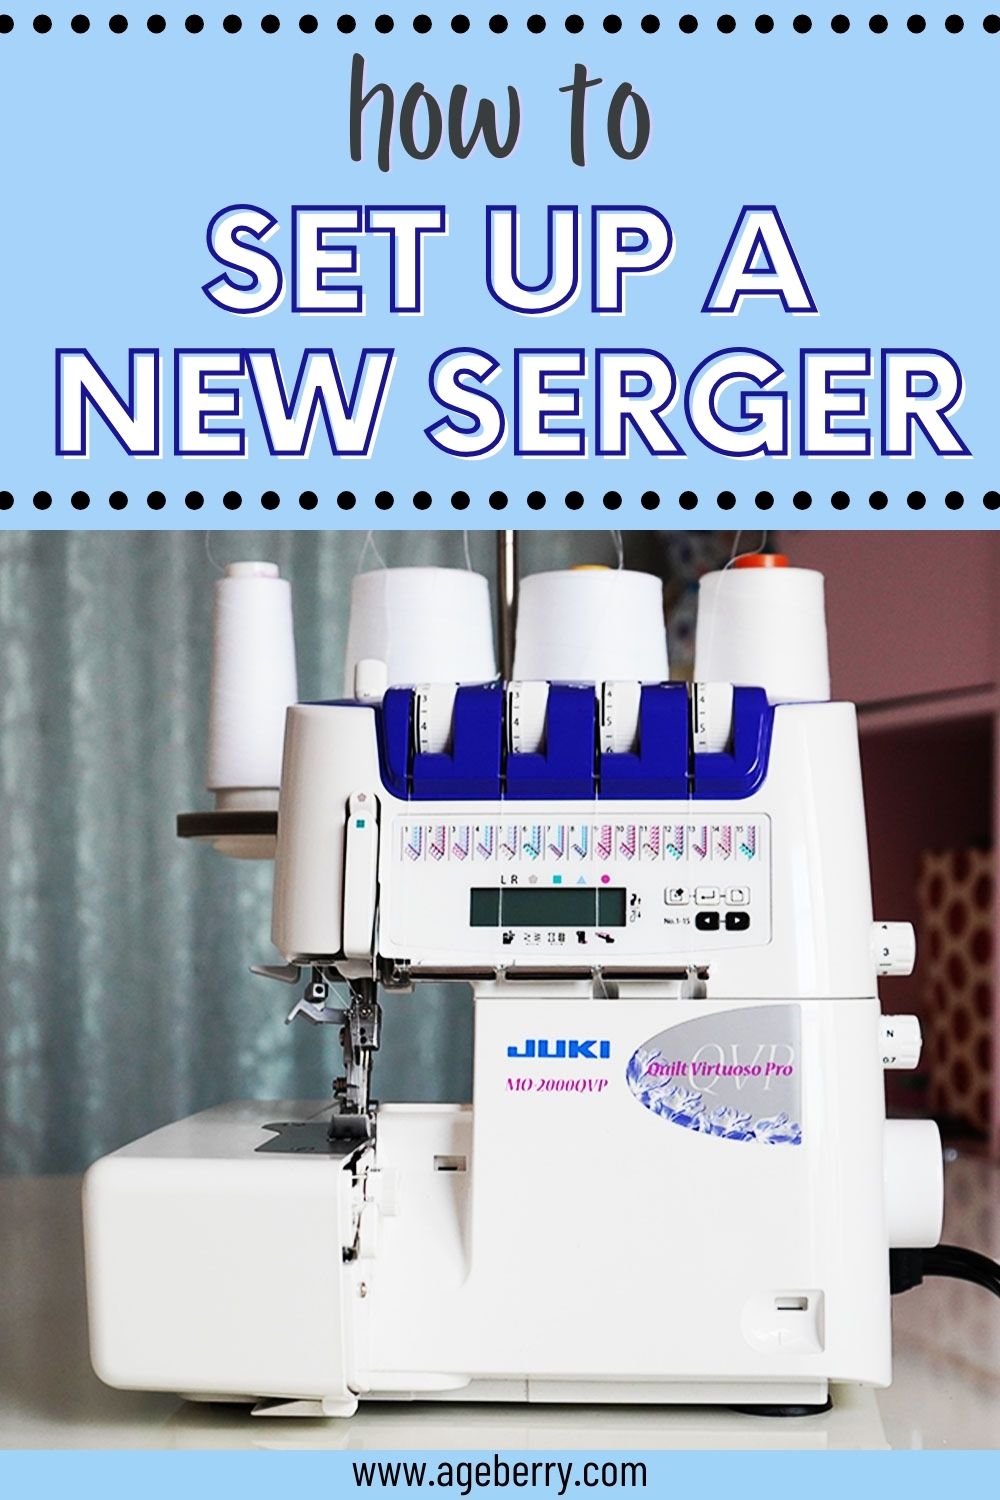 HOW TO SET UP A NEW SERGER